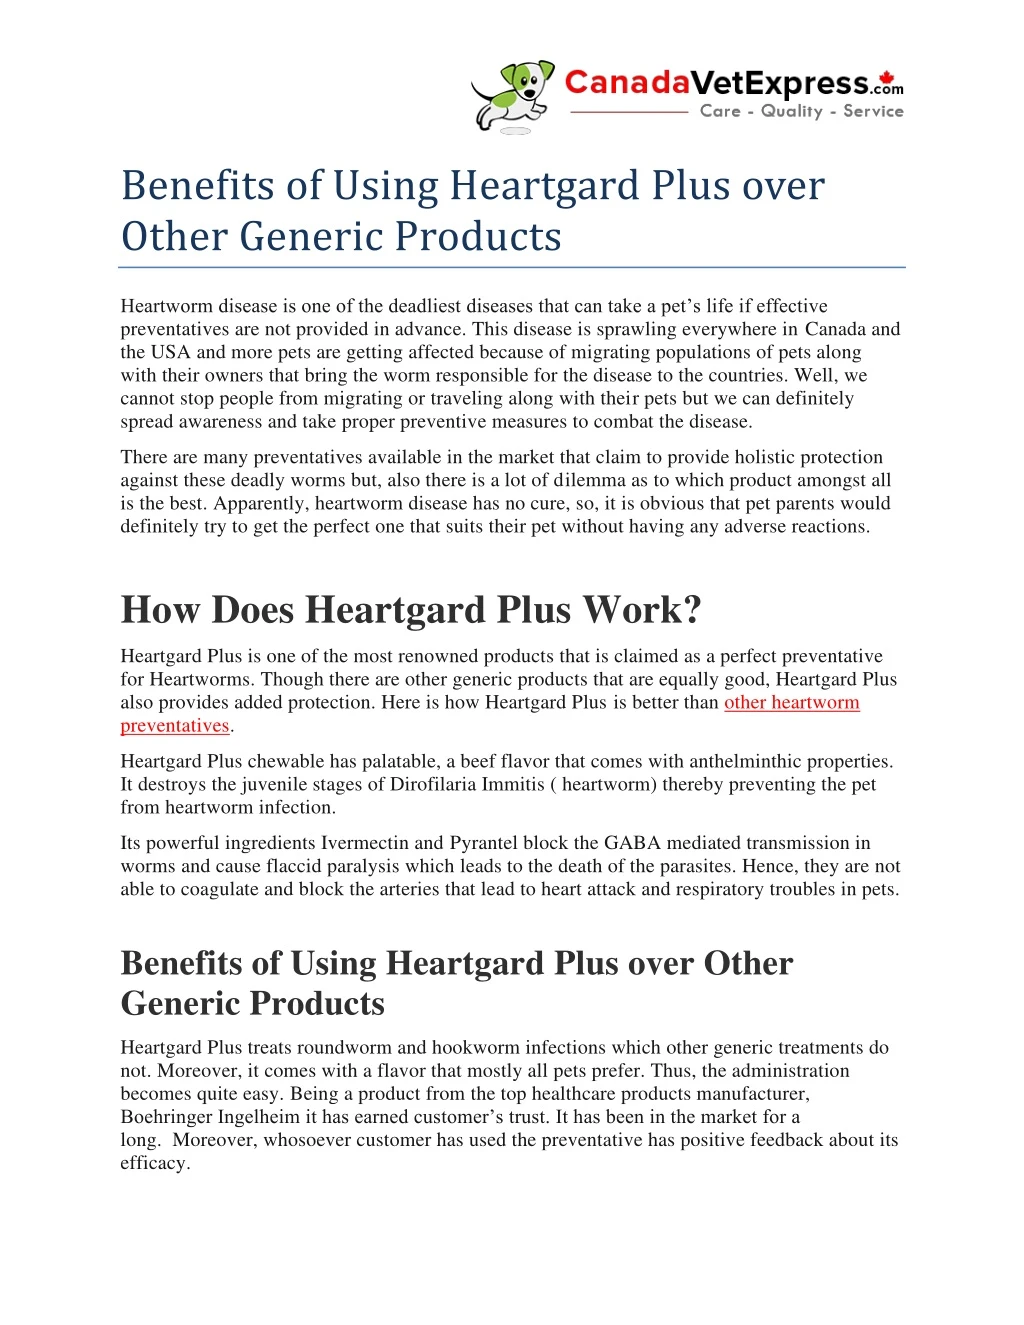 benefits of using heartgard plus over other